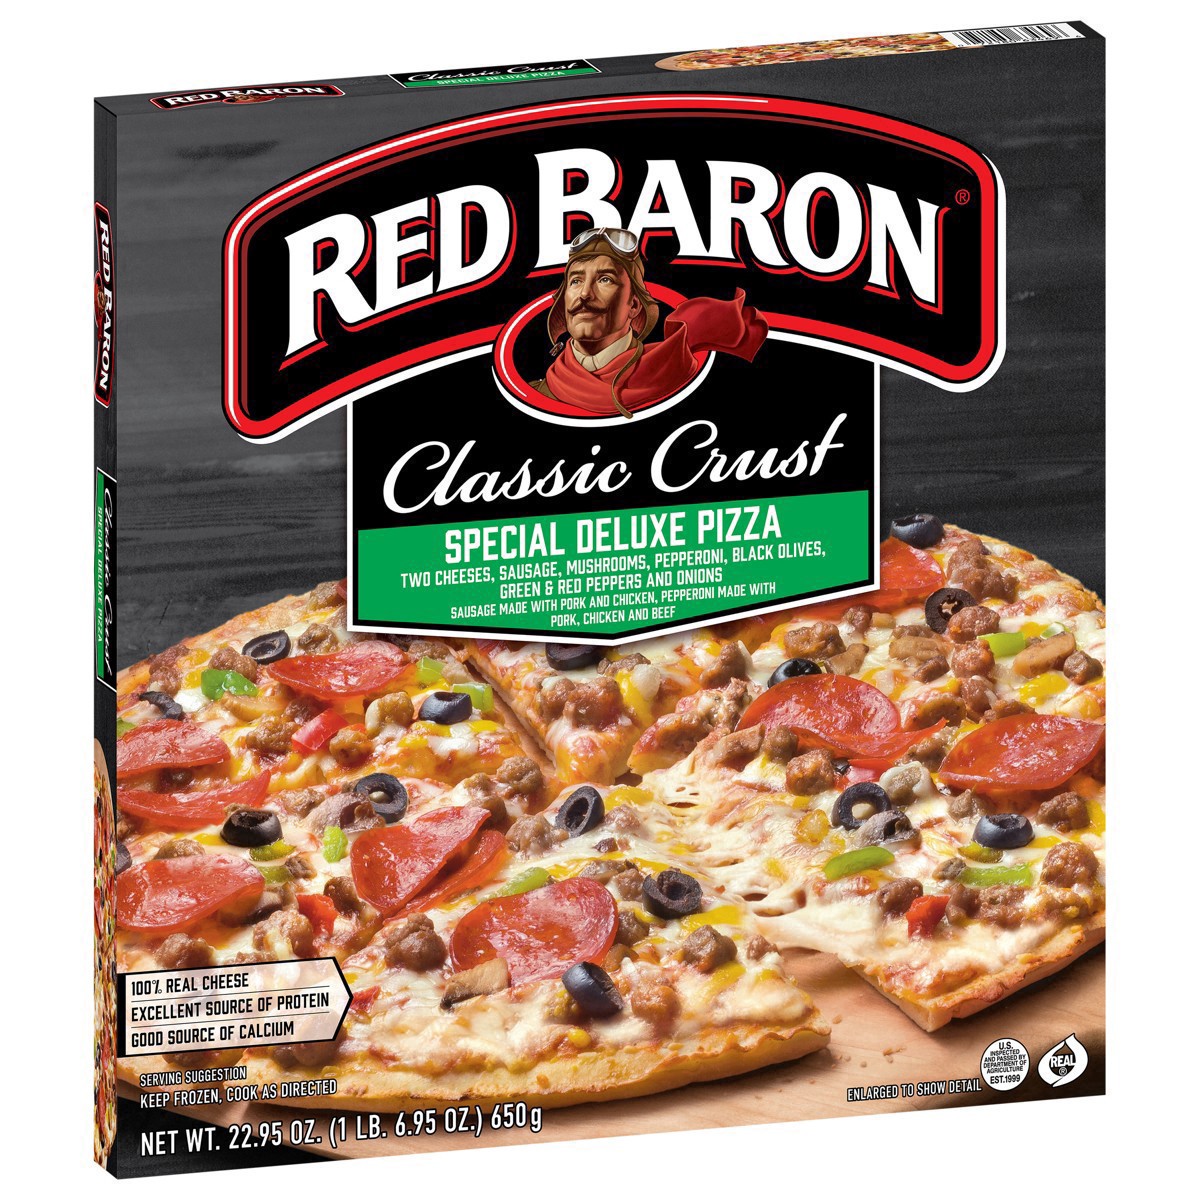 slide 12 of 89, Red Baron Frozen Pizza Classic Crust Special Deluxe, 1.43 lb